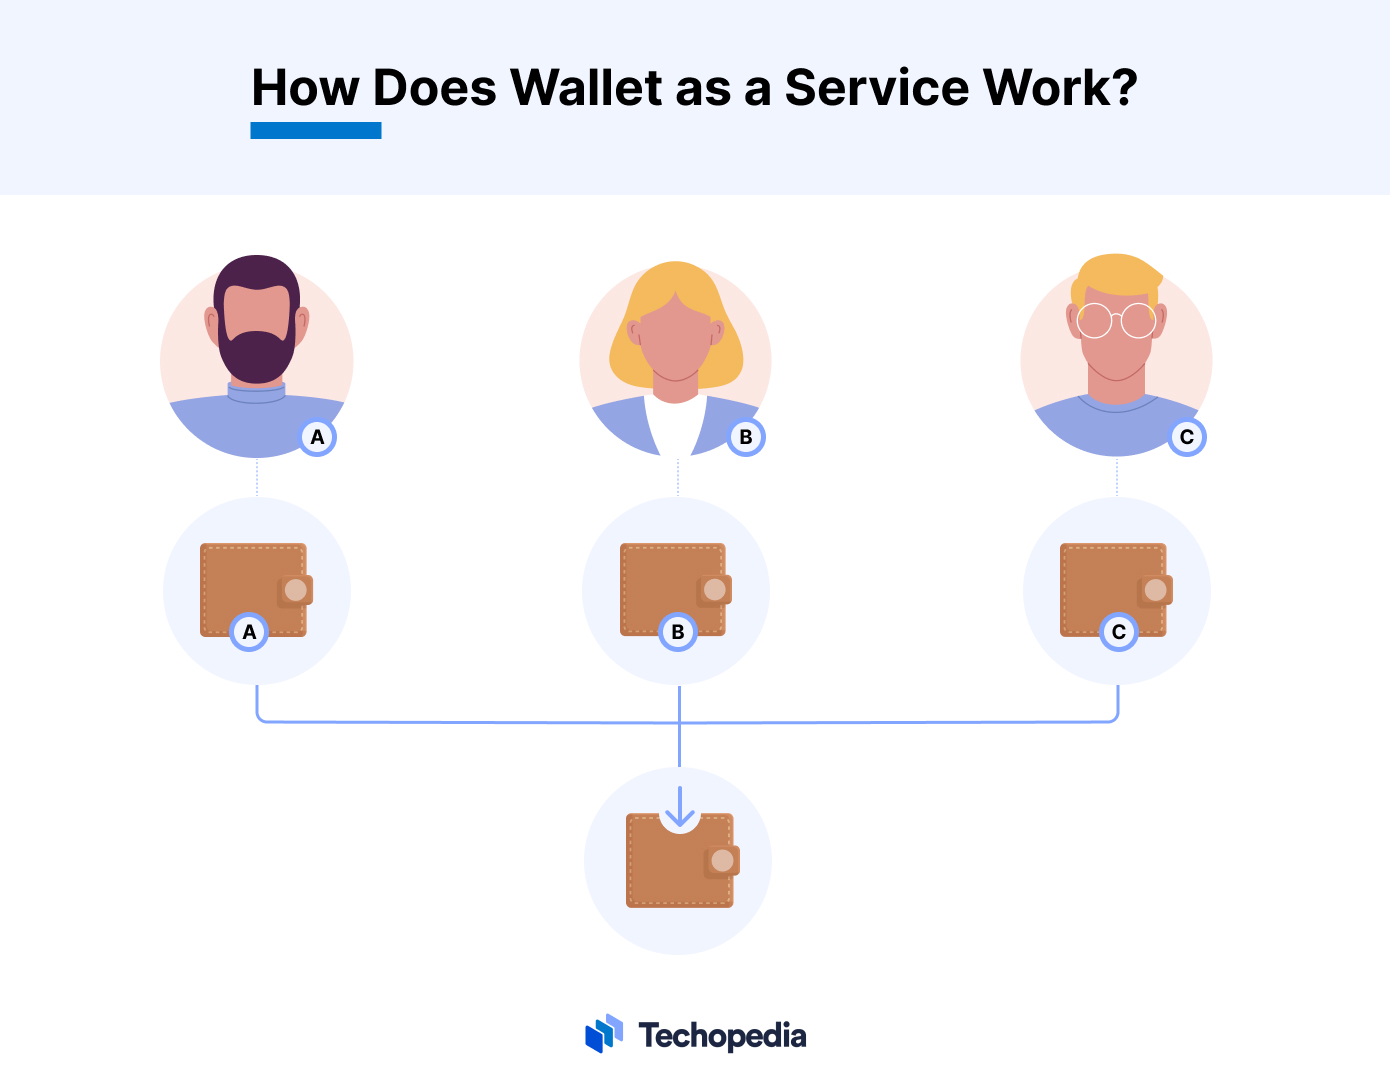 How Does Wallet as a Service Work?